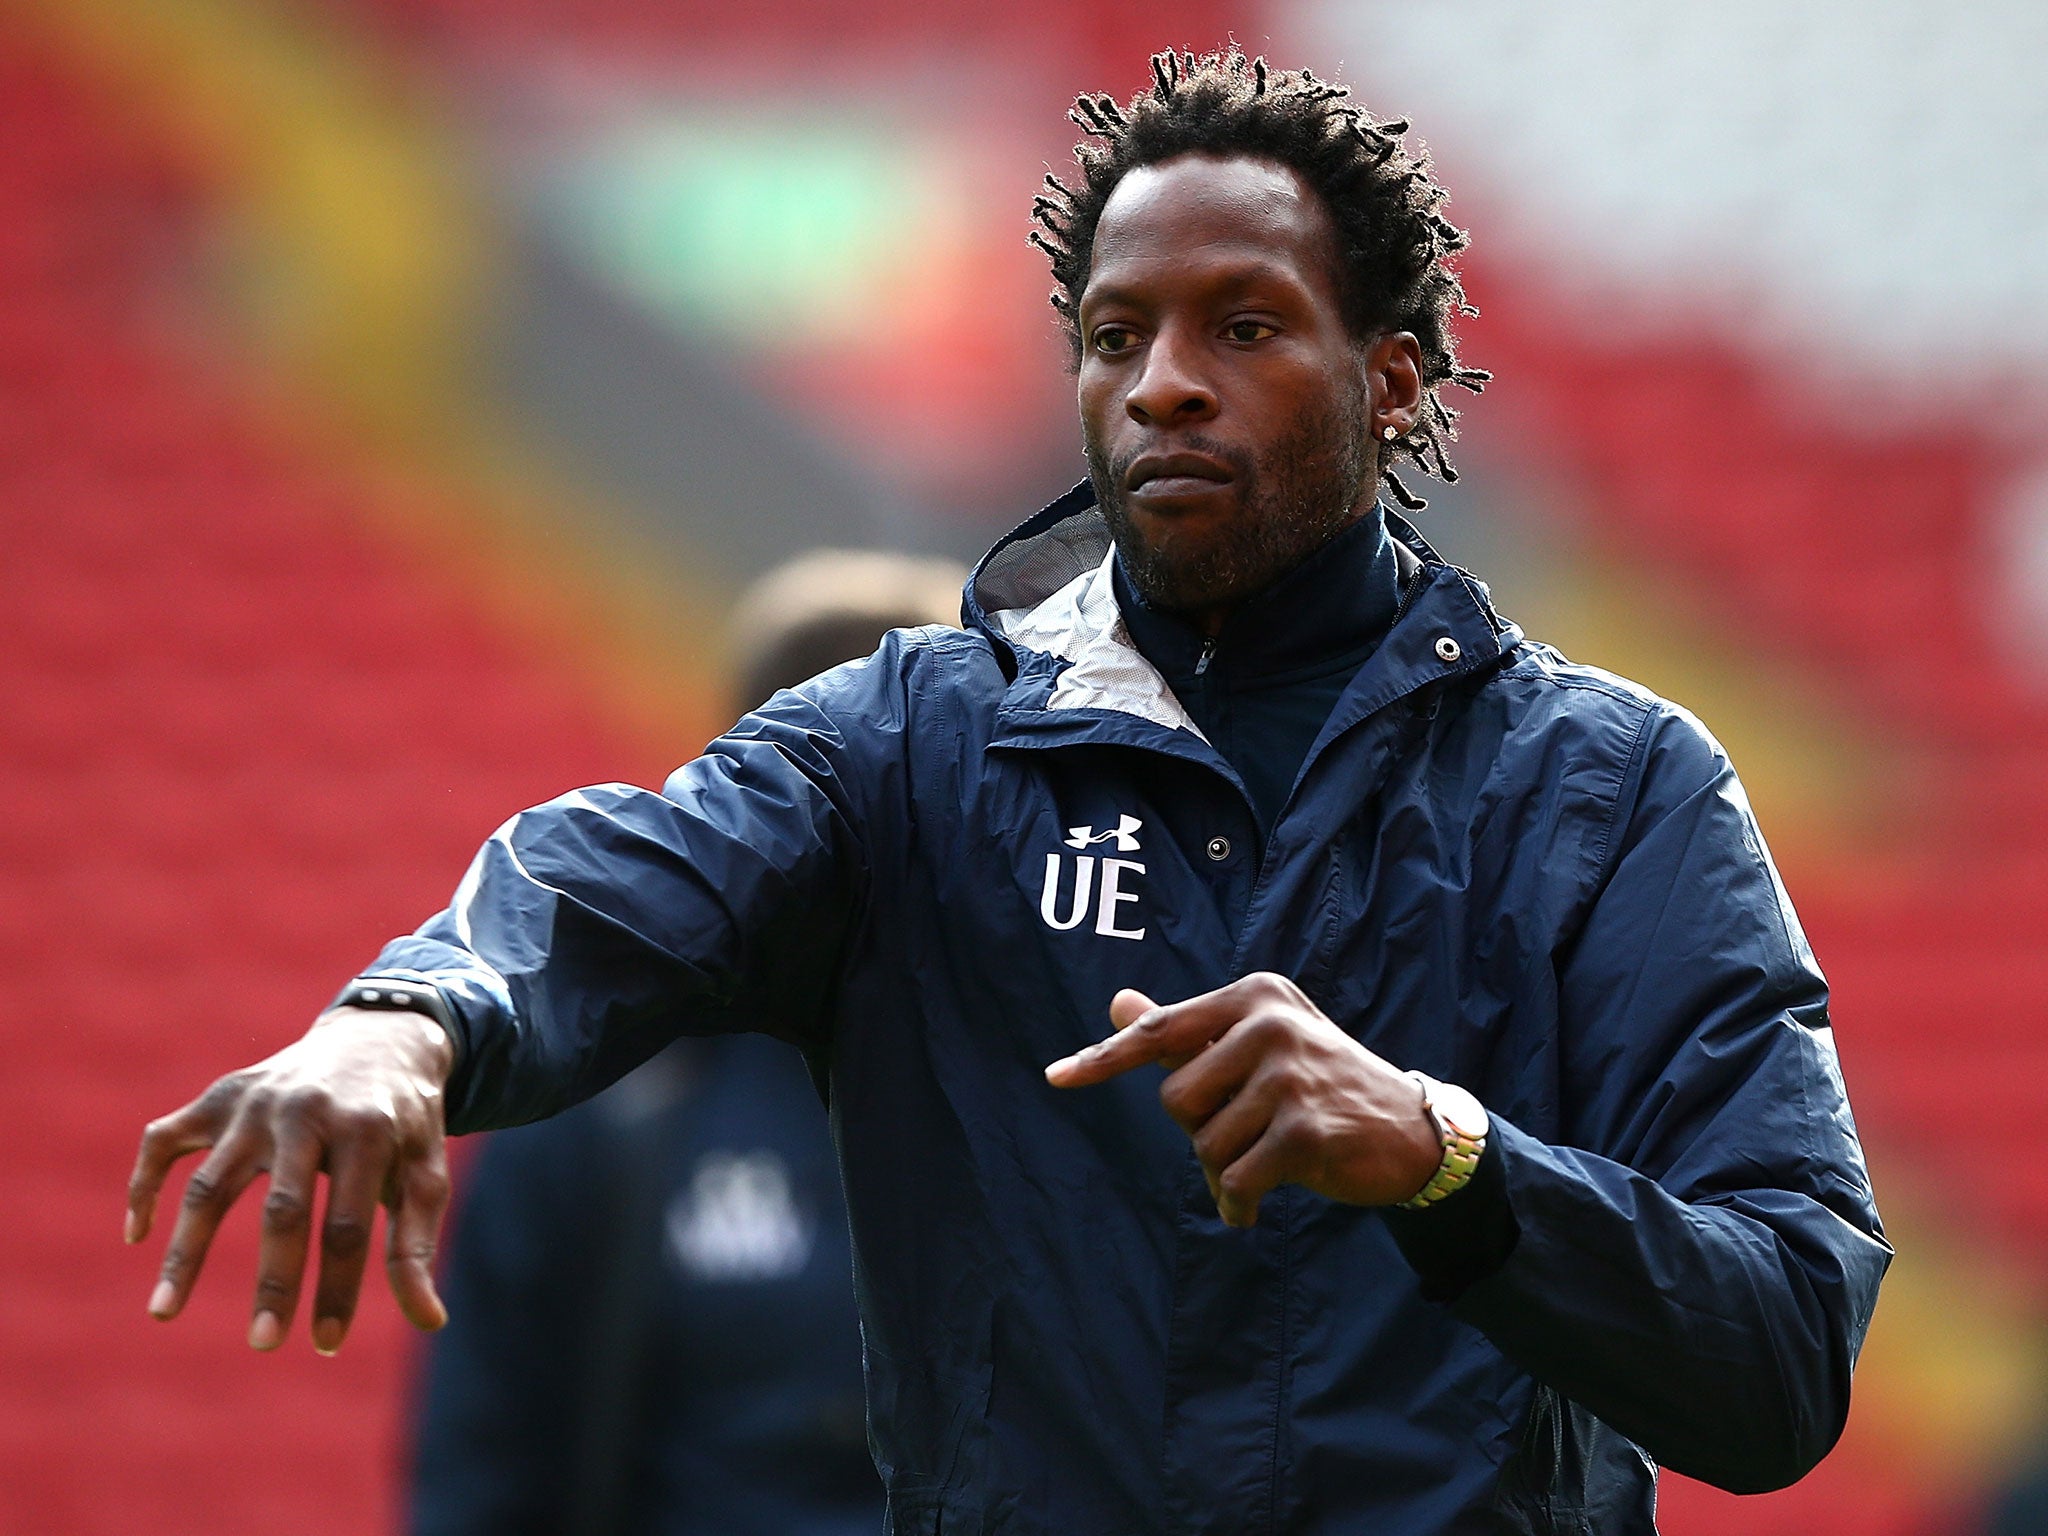 Ugo Ehiogu has died after collapsing at Tottenham's training ground on Thursday